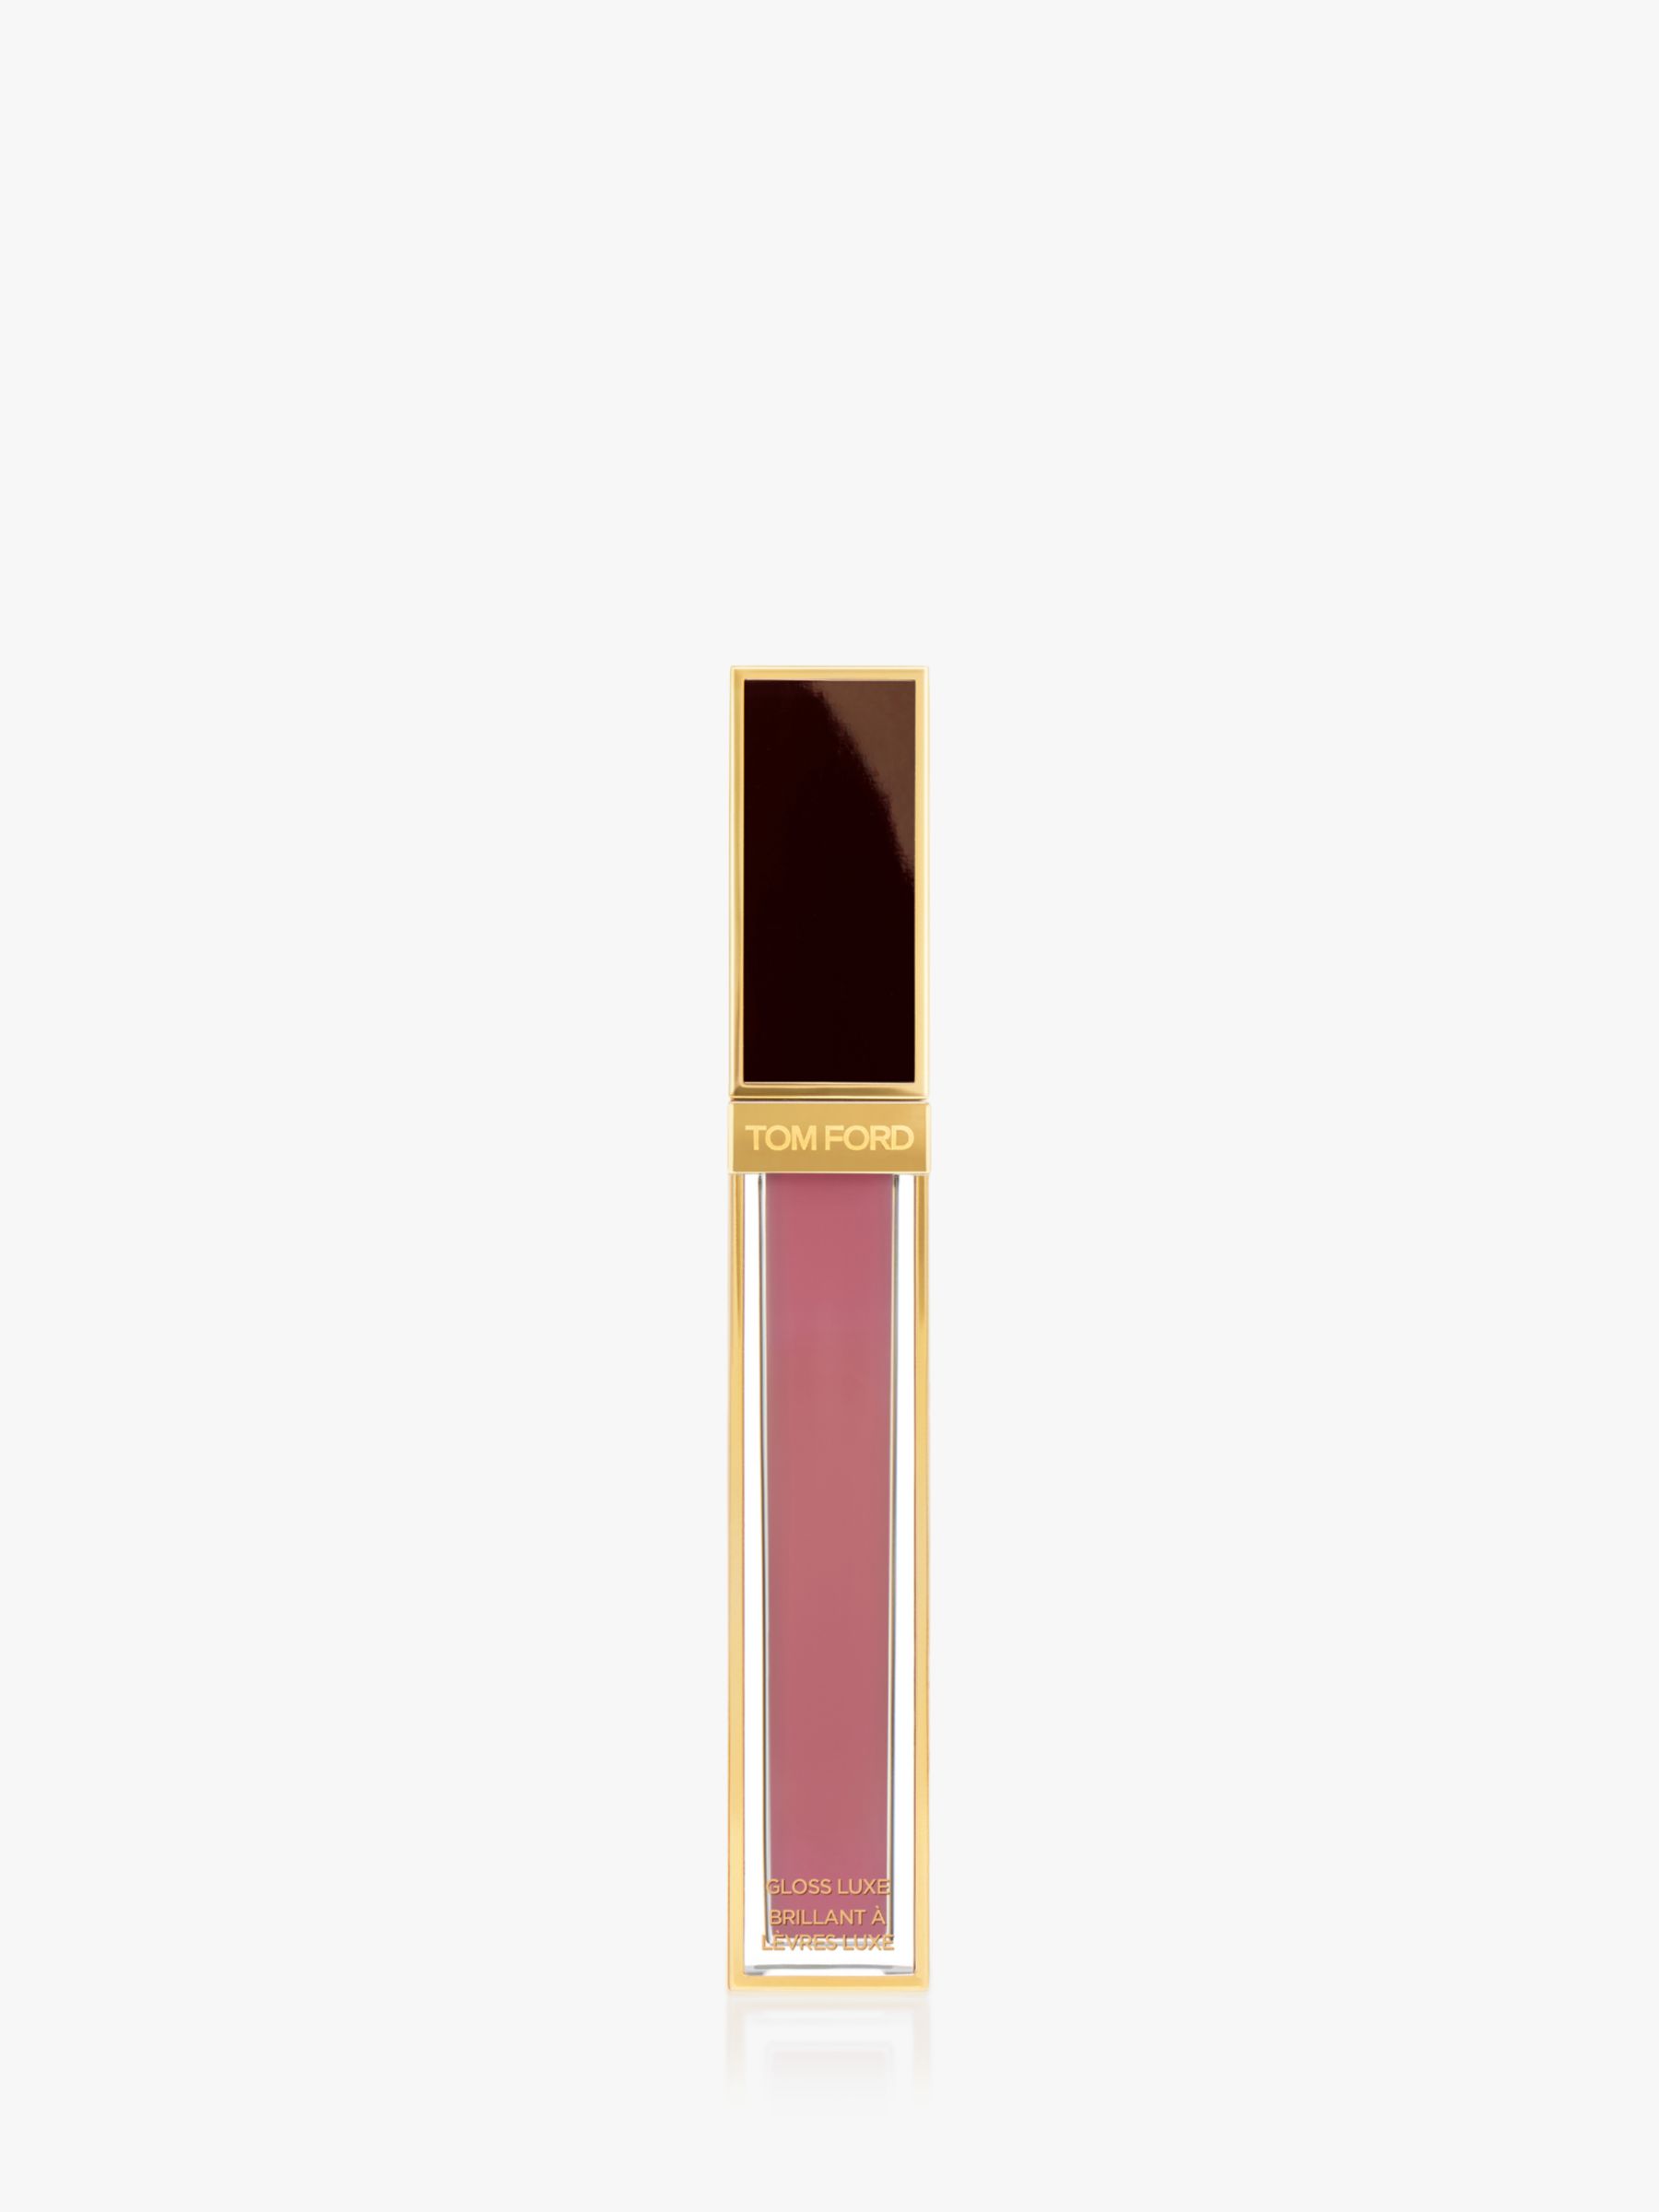 TOM FORD Gloss Luxe Lipgloss at John Lewis & Partners